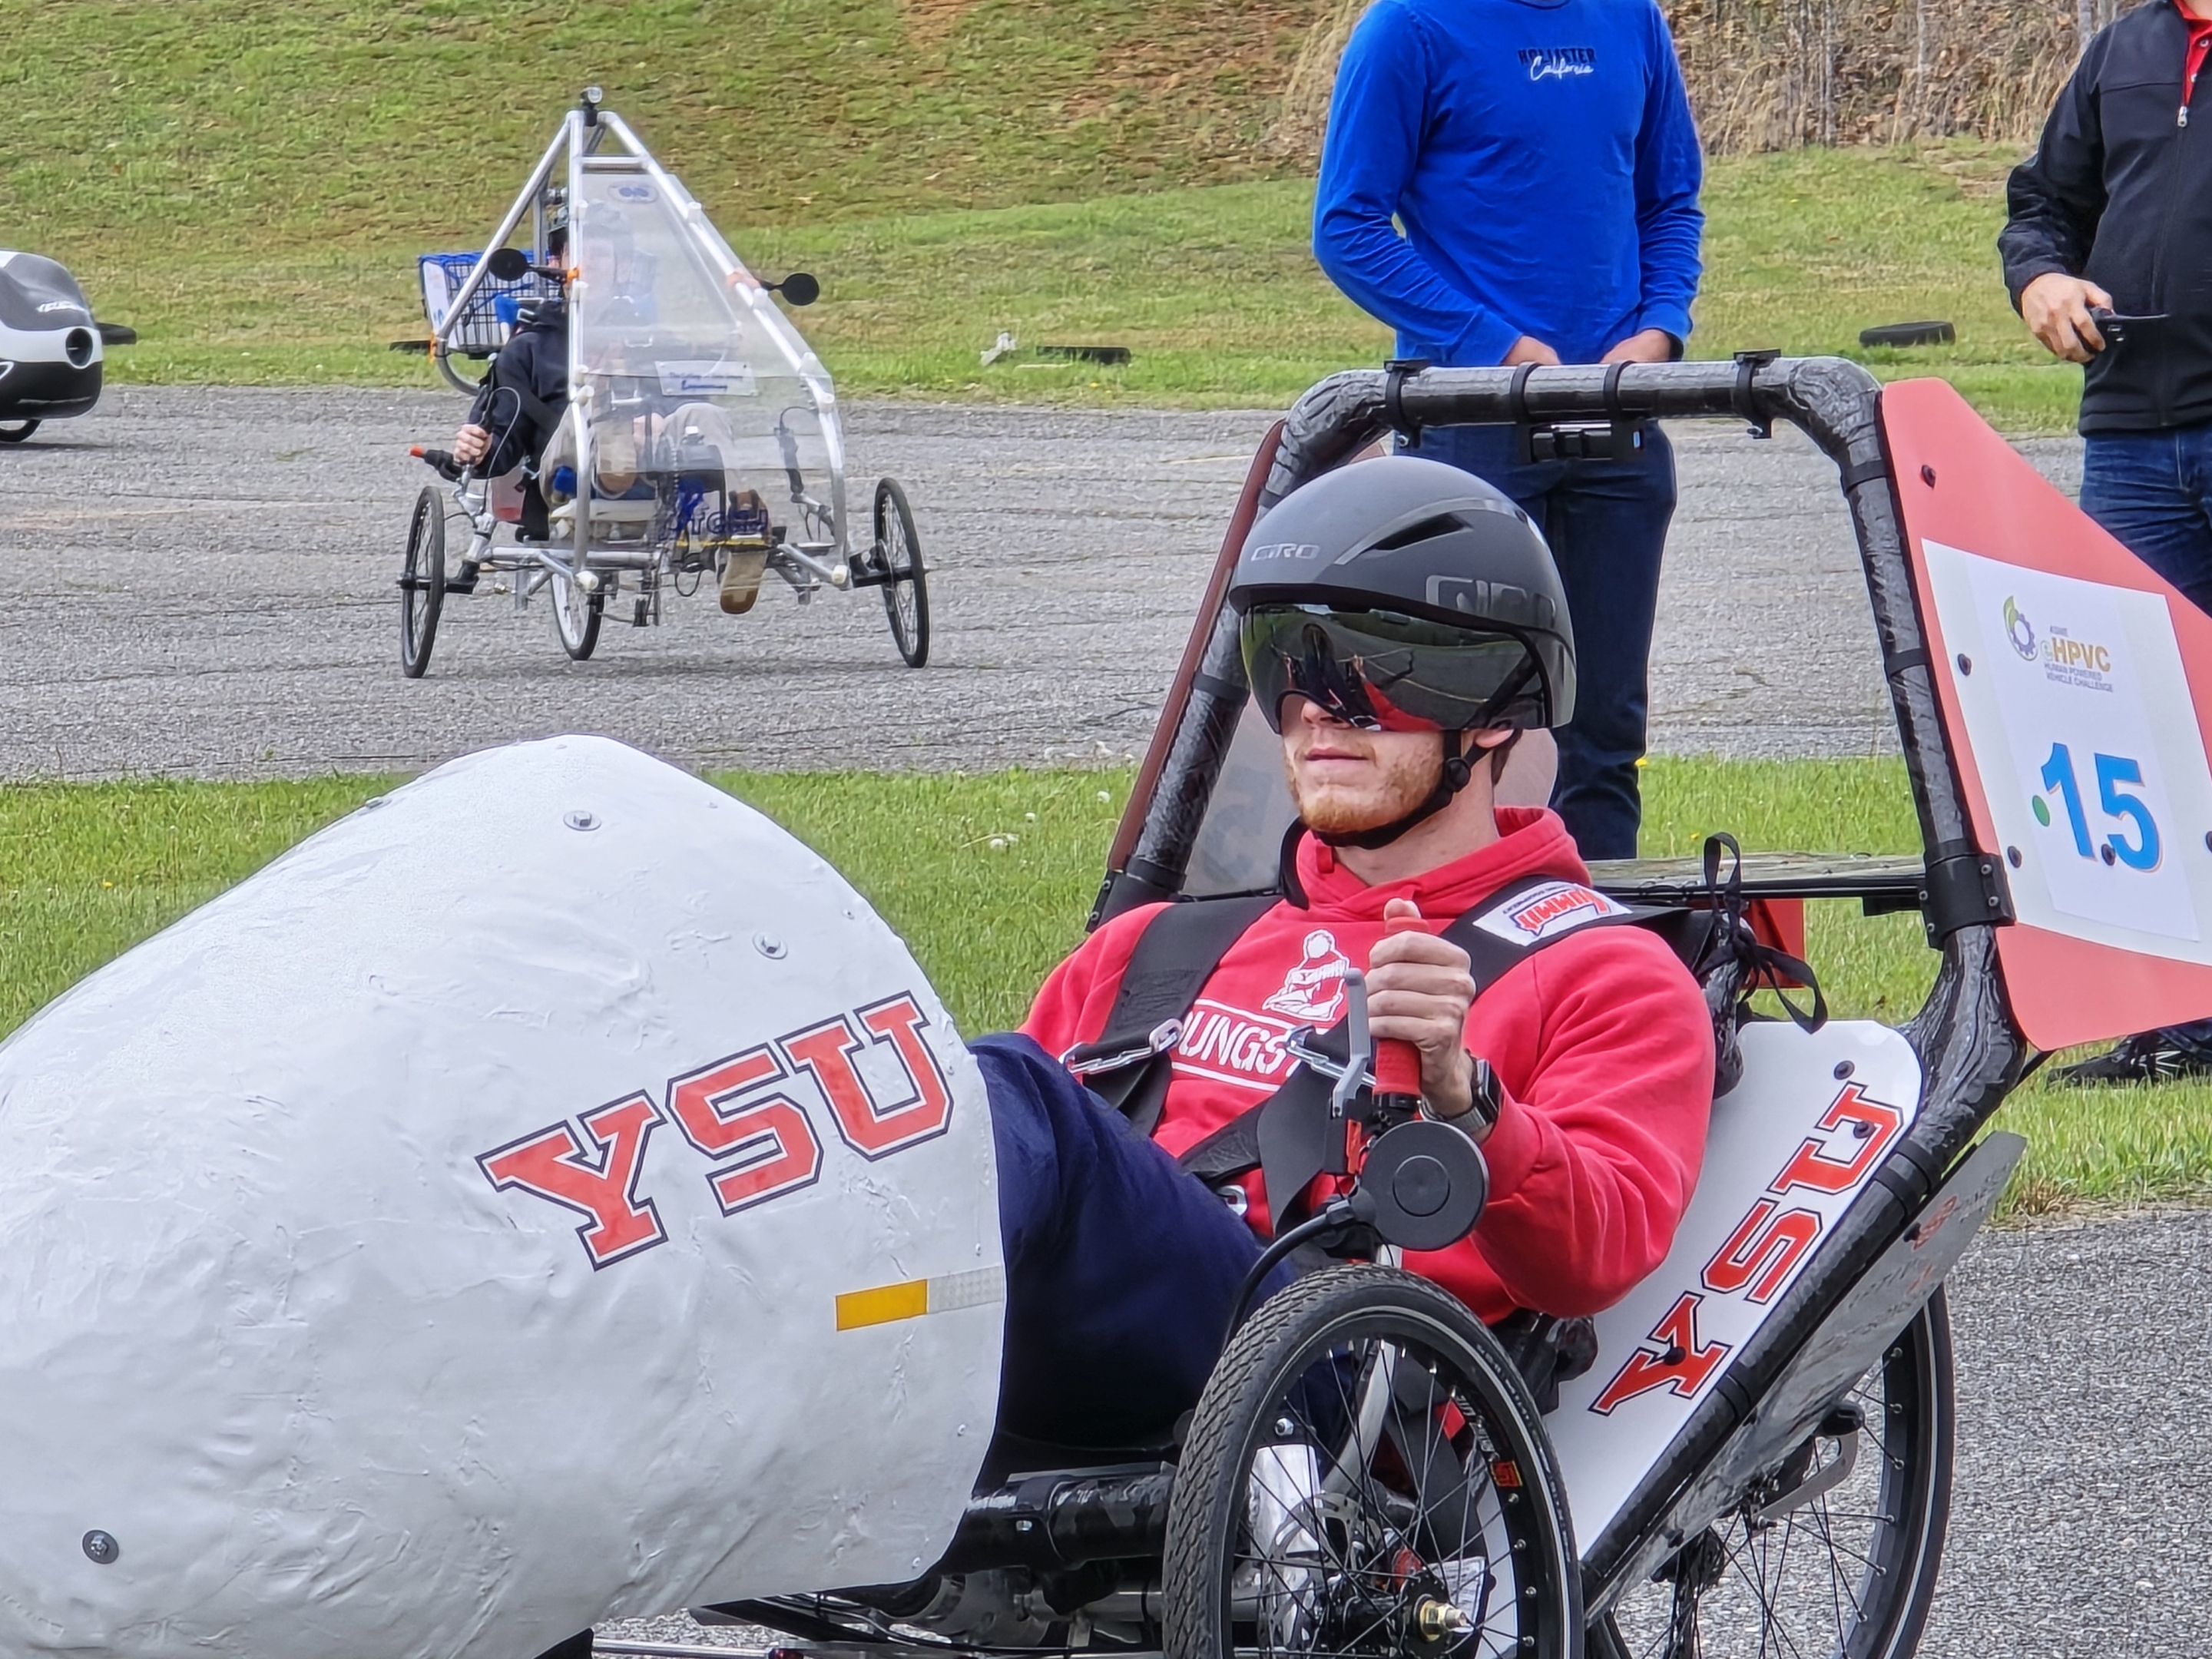 YSU competing at the e-Human Powered Vehicle Challenge